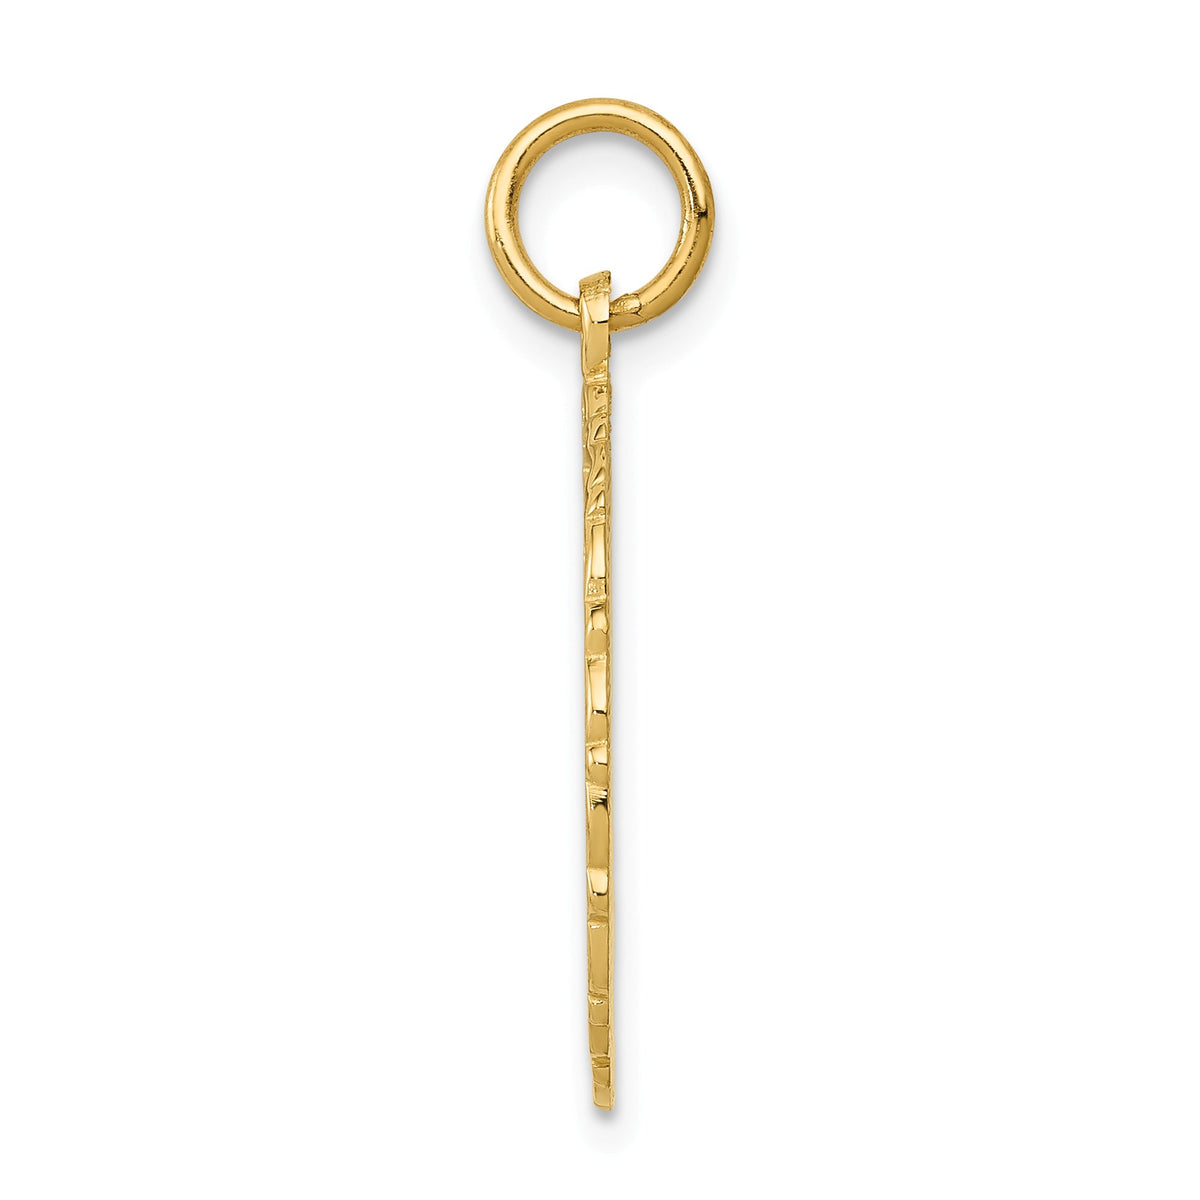 Alternate view of the 14k Yellow Gold Registered Nurse Disk Charm, 18mm by The Black Bow Jewelry Co.